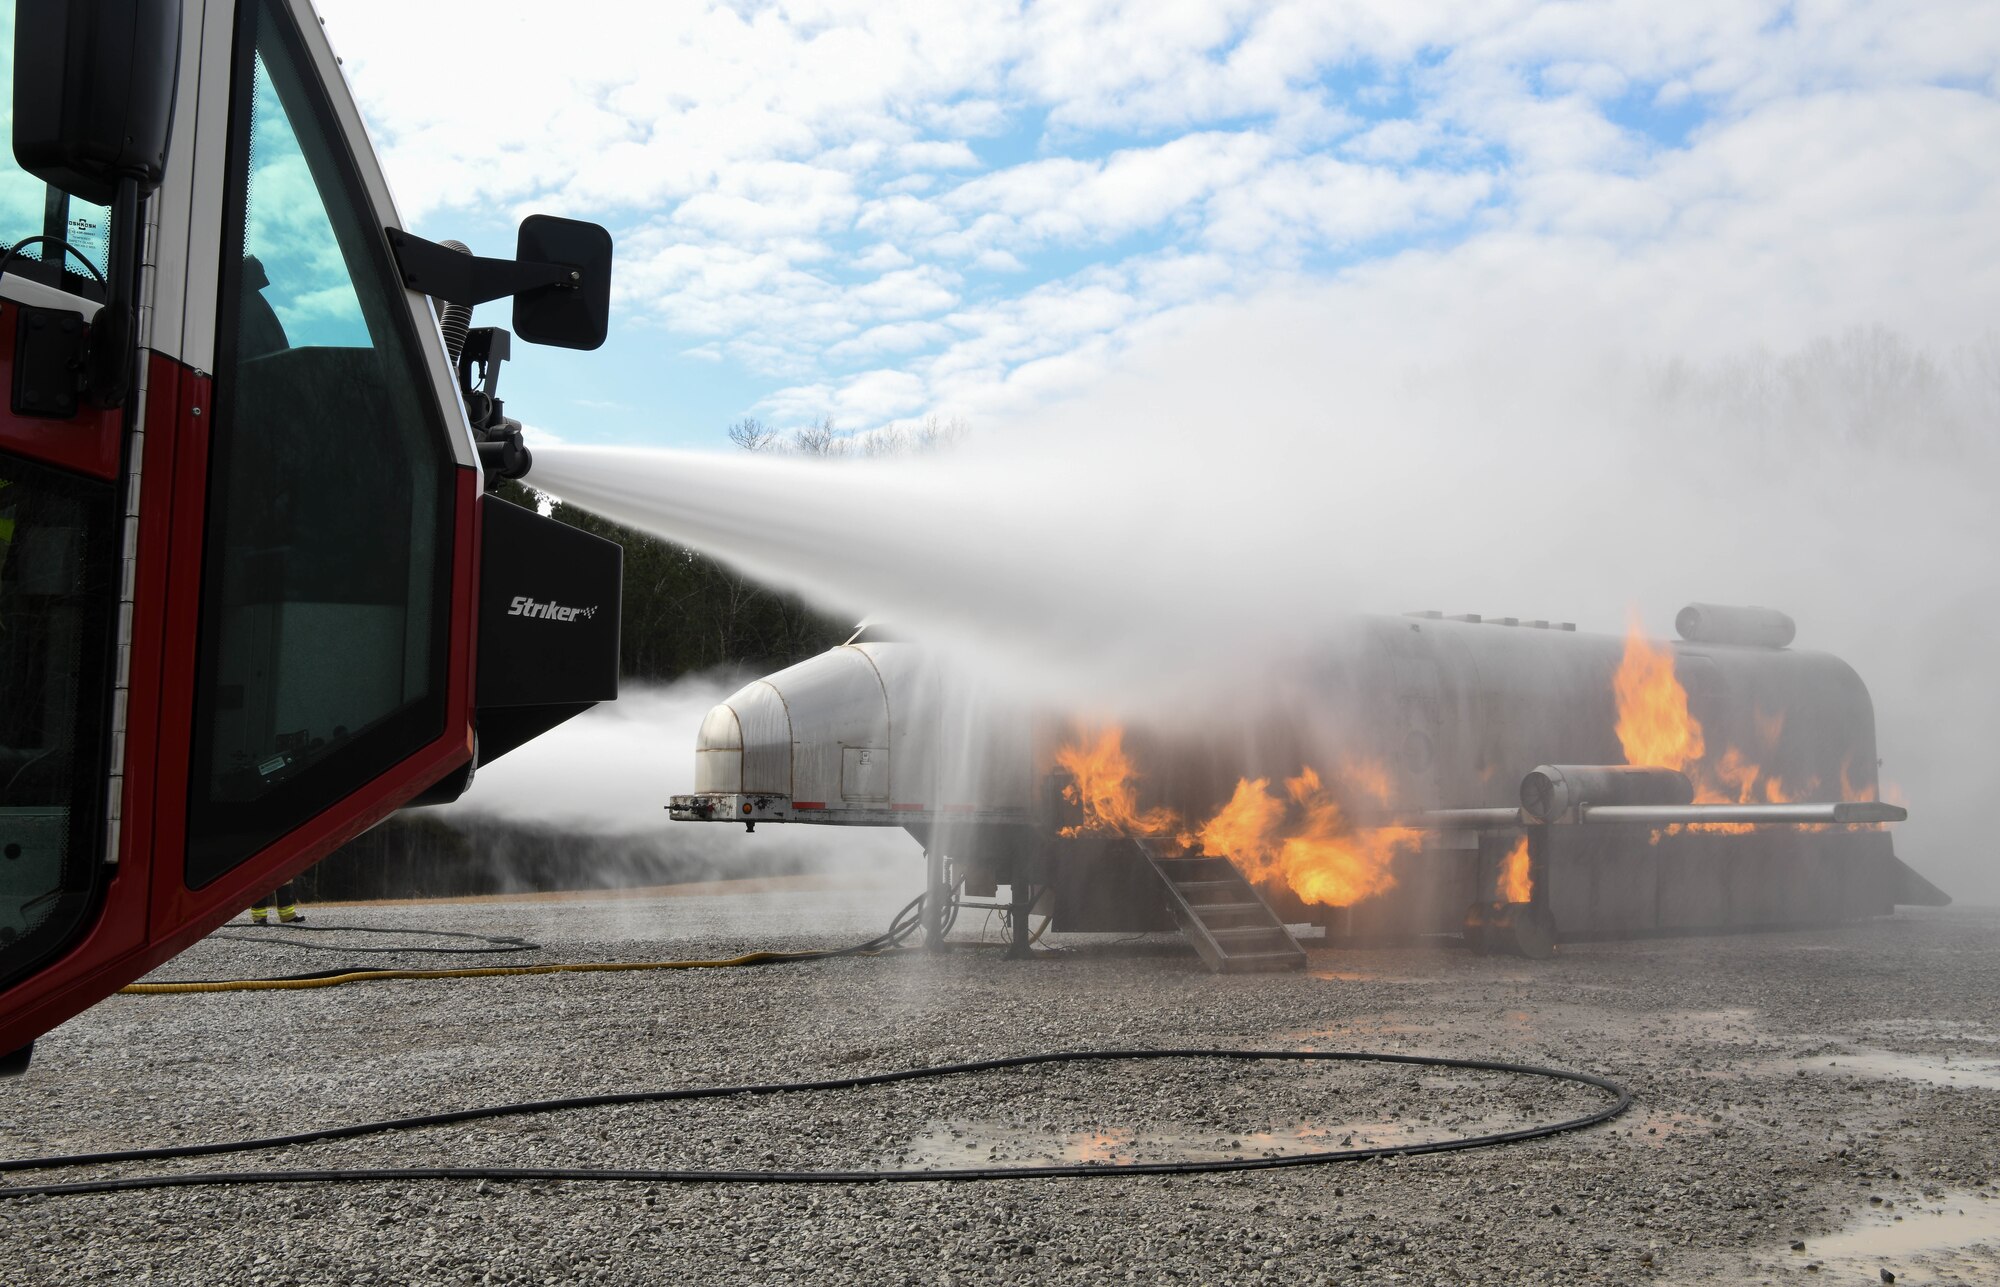 Water pours onto a training simulator from vehicle-mounted nozzles as Arnold Air Force Base Fire and Emergency Services personnel train Feb. 10, 2021, on aircraft rescue and firefighting techniques at the base. (U.S. Air Force photo by Jill Pickett)